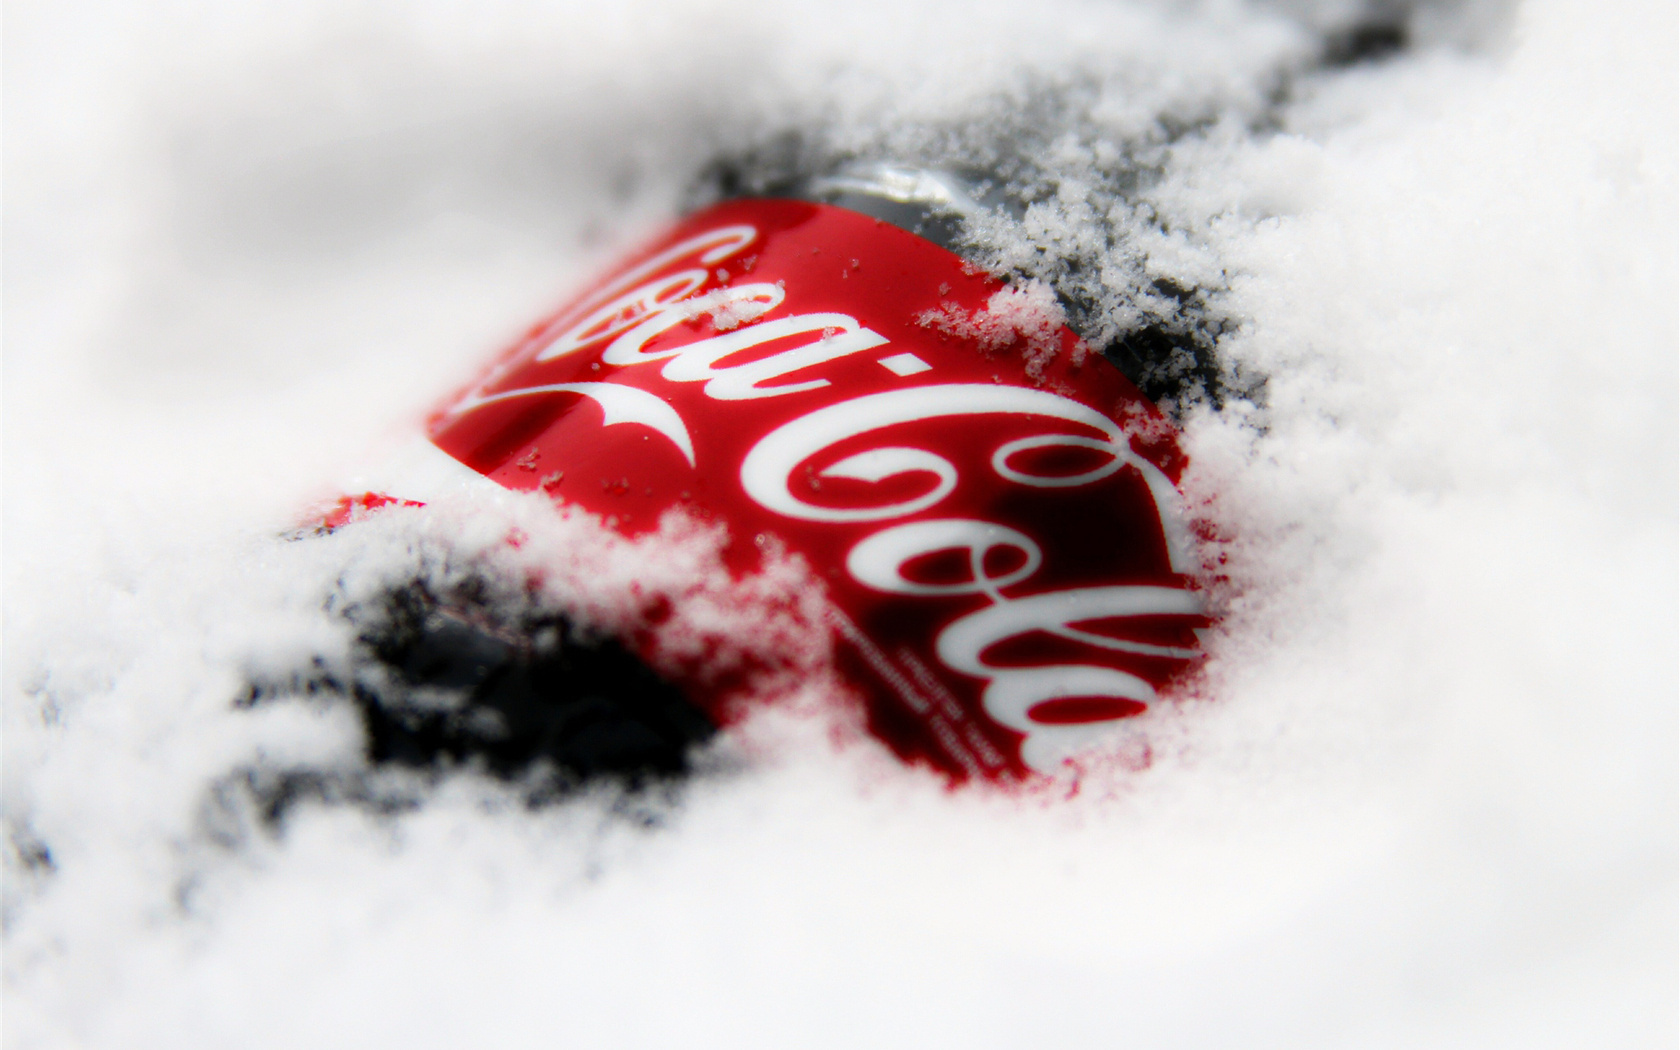 logos, coca cola, brands, snow cell phone wallpapers